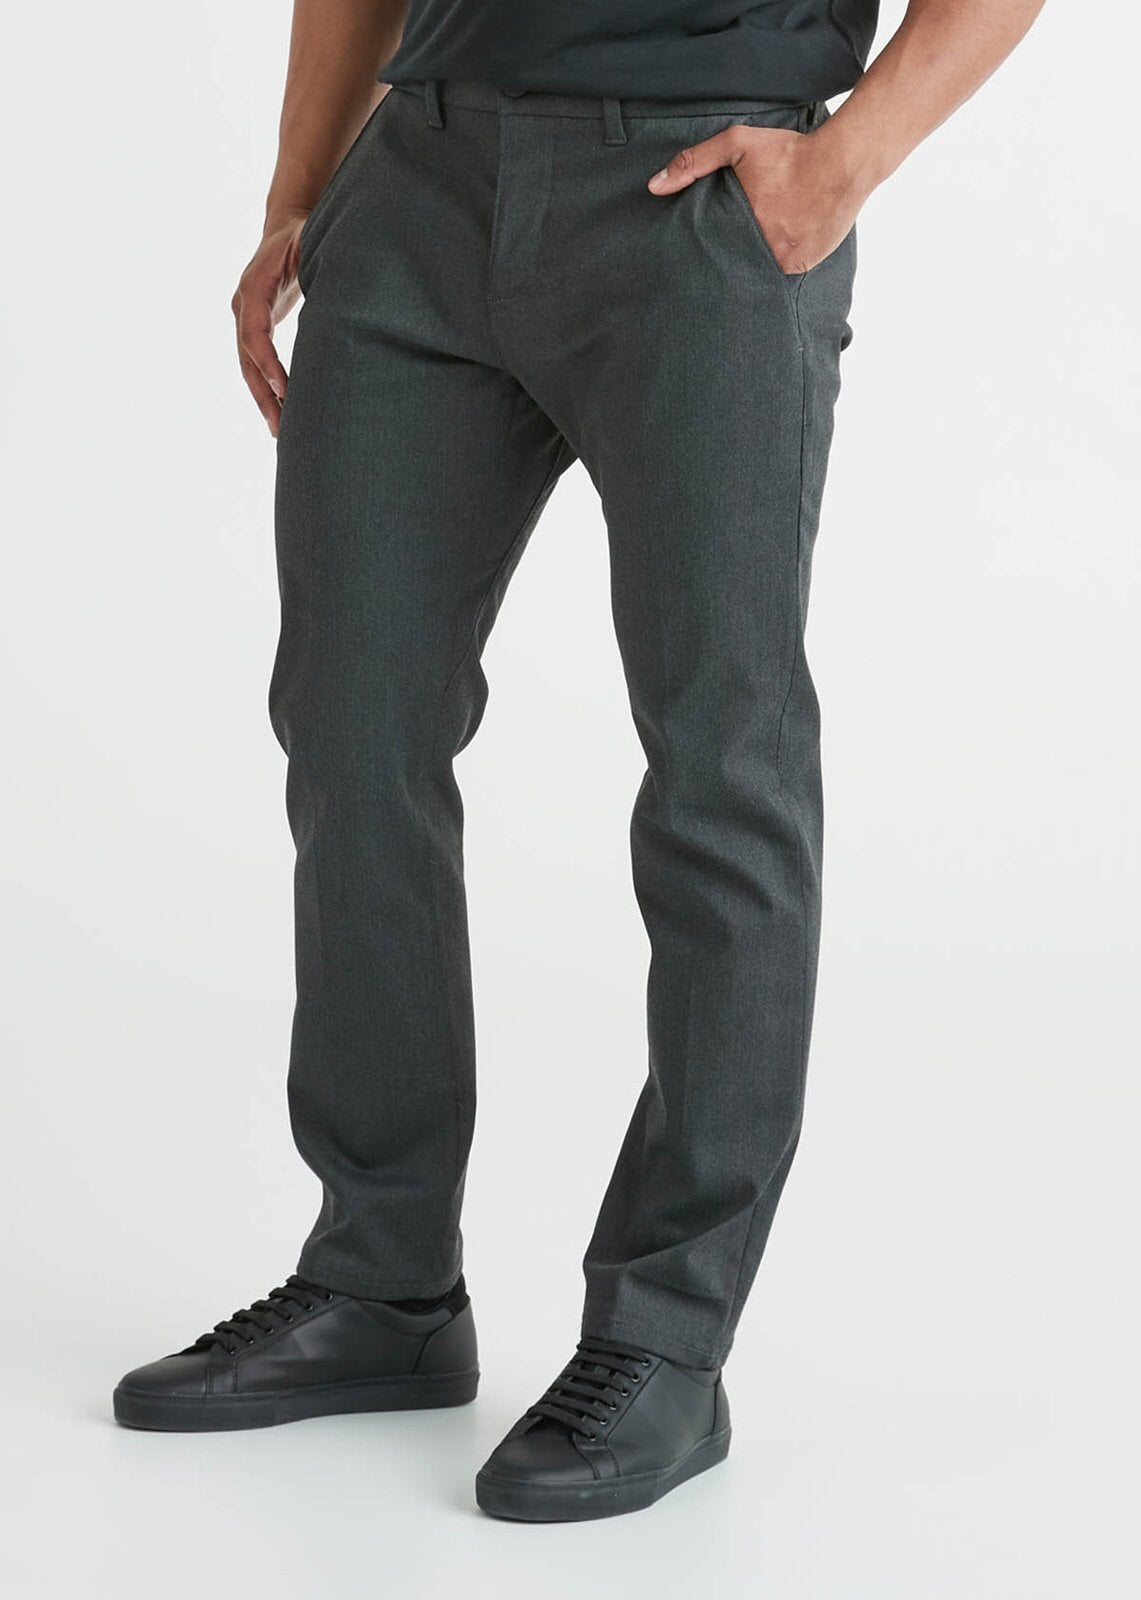 Smart Stretch Pant Relaxed Taper - Charcoal Heather